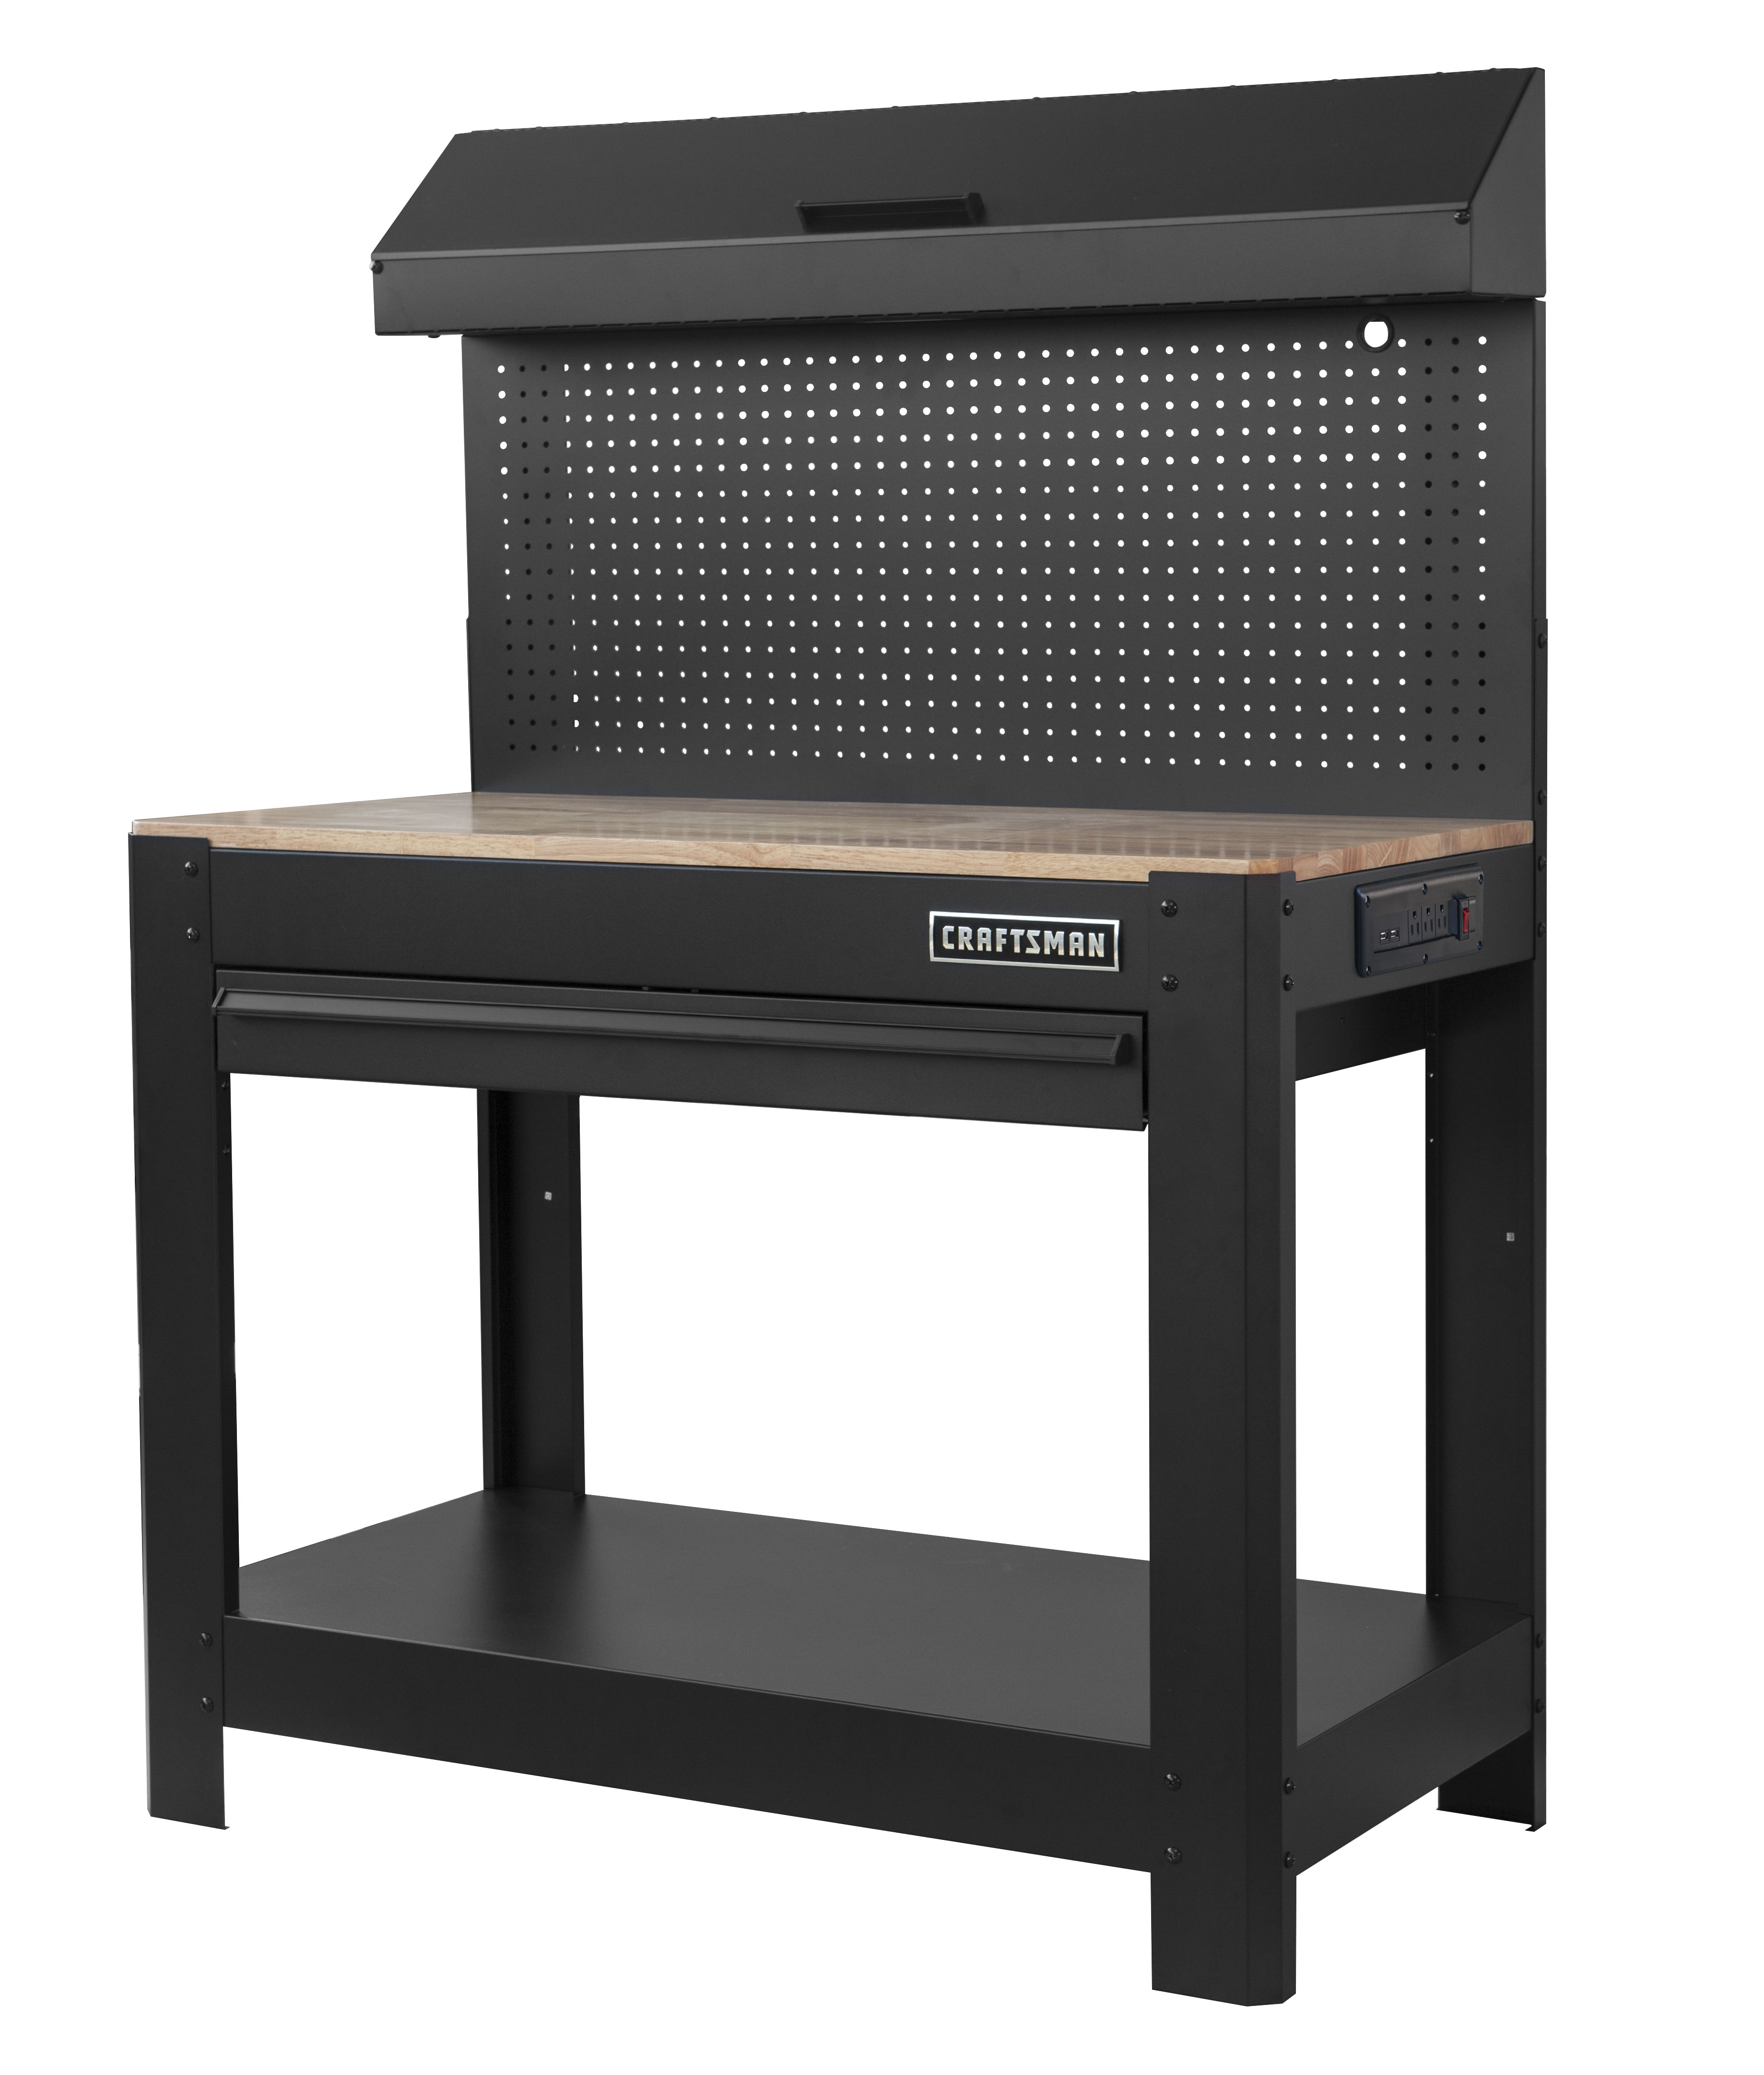 Craftsman 45-in Workbench with Drawer | Shop Your Way 